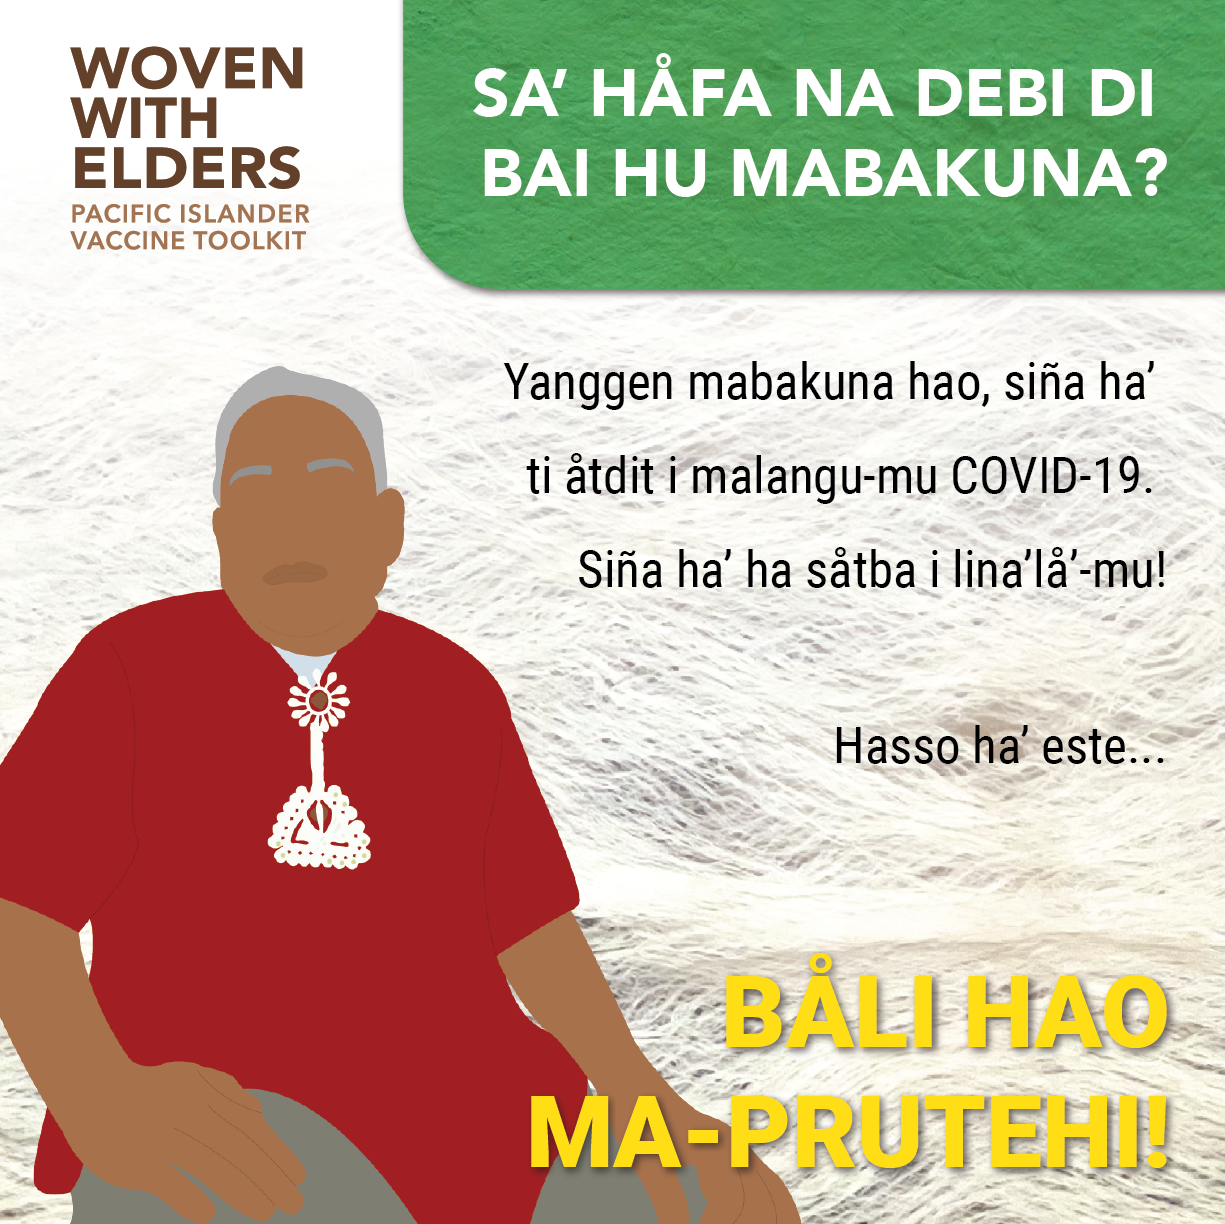 Cartoon image of an elder Pacific Islander man. Text reads, "Why should I get a vaccine? Getting the vaccine can prevent you from becoming seriously ill from COVID-19. It can potentially save your life! Remember...you are worth protecting!"